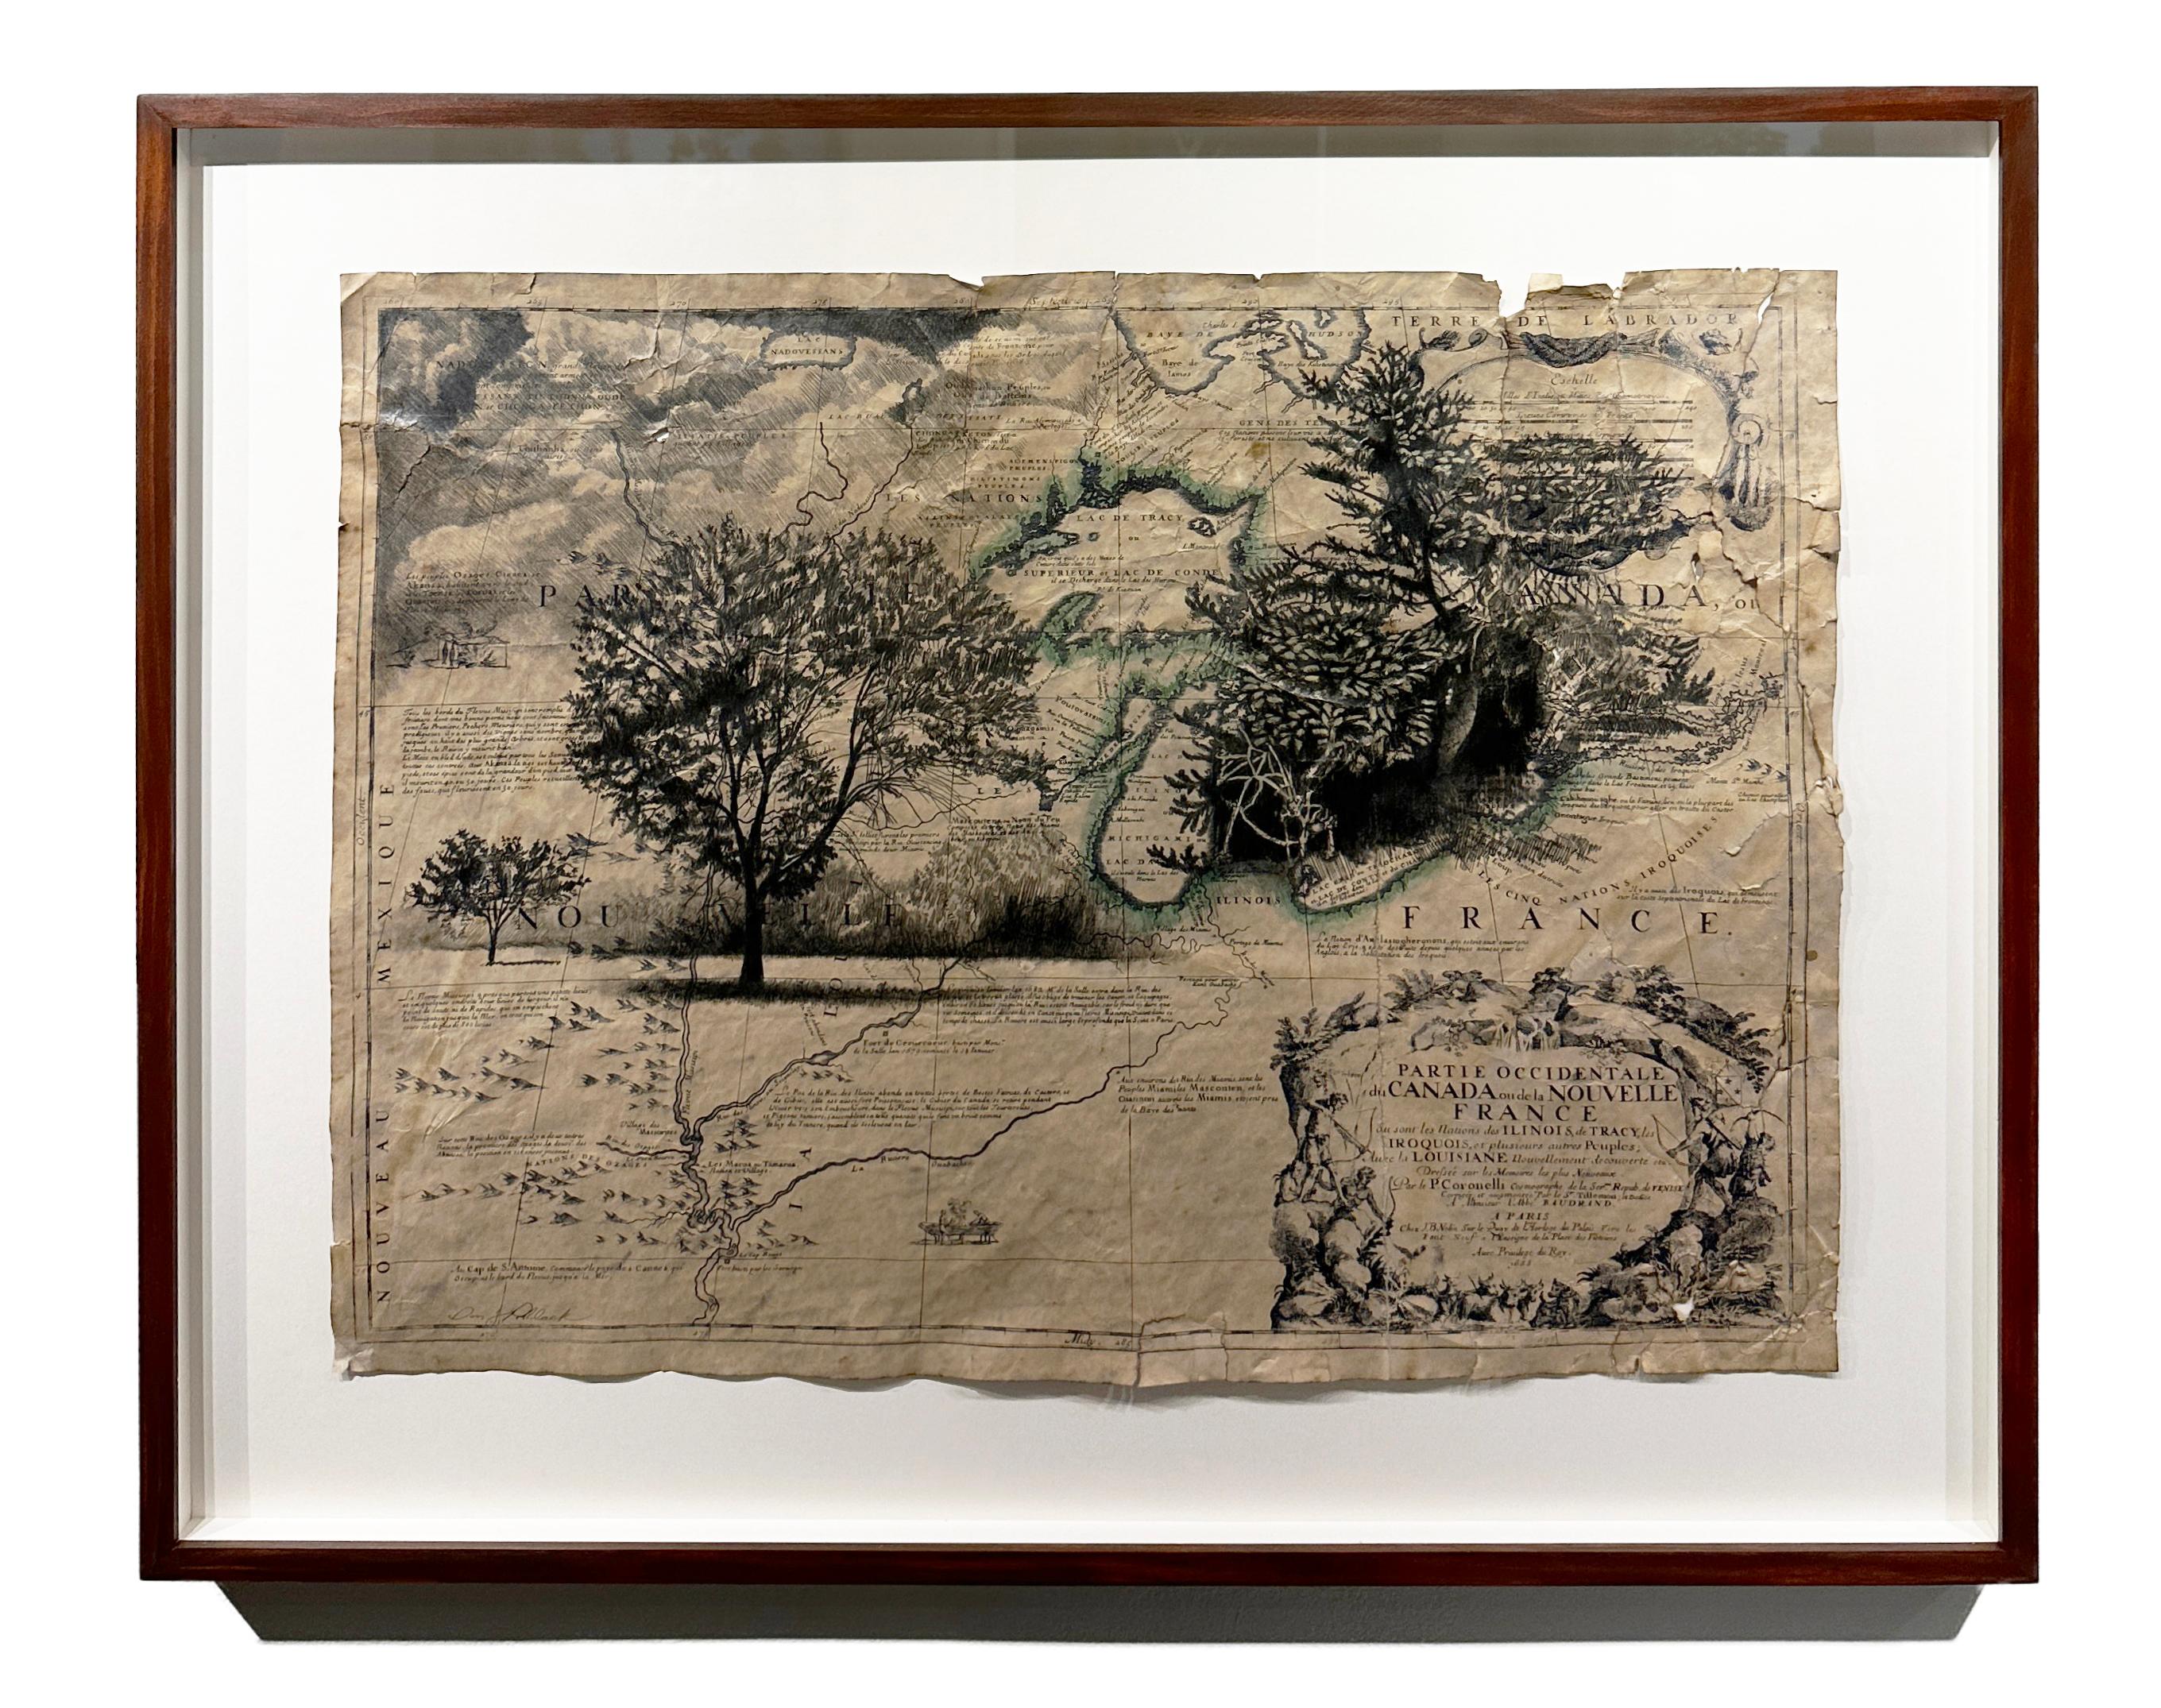 Don Pollack Landscape Painting - New France and Labrador - Graphite Drawing, Landscape, On Antiqued Map